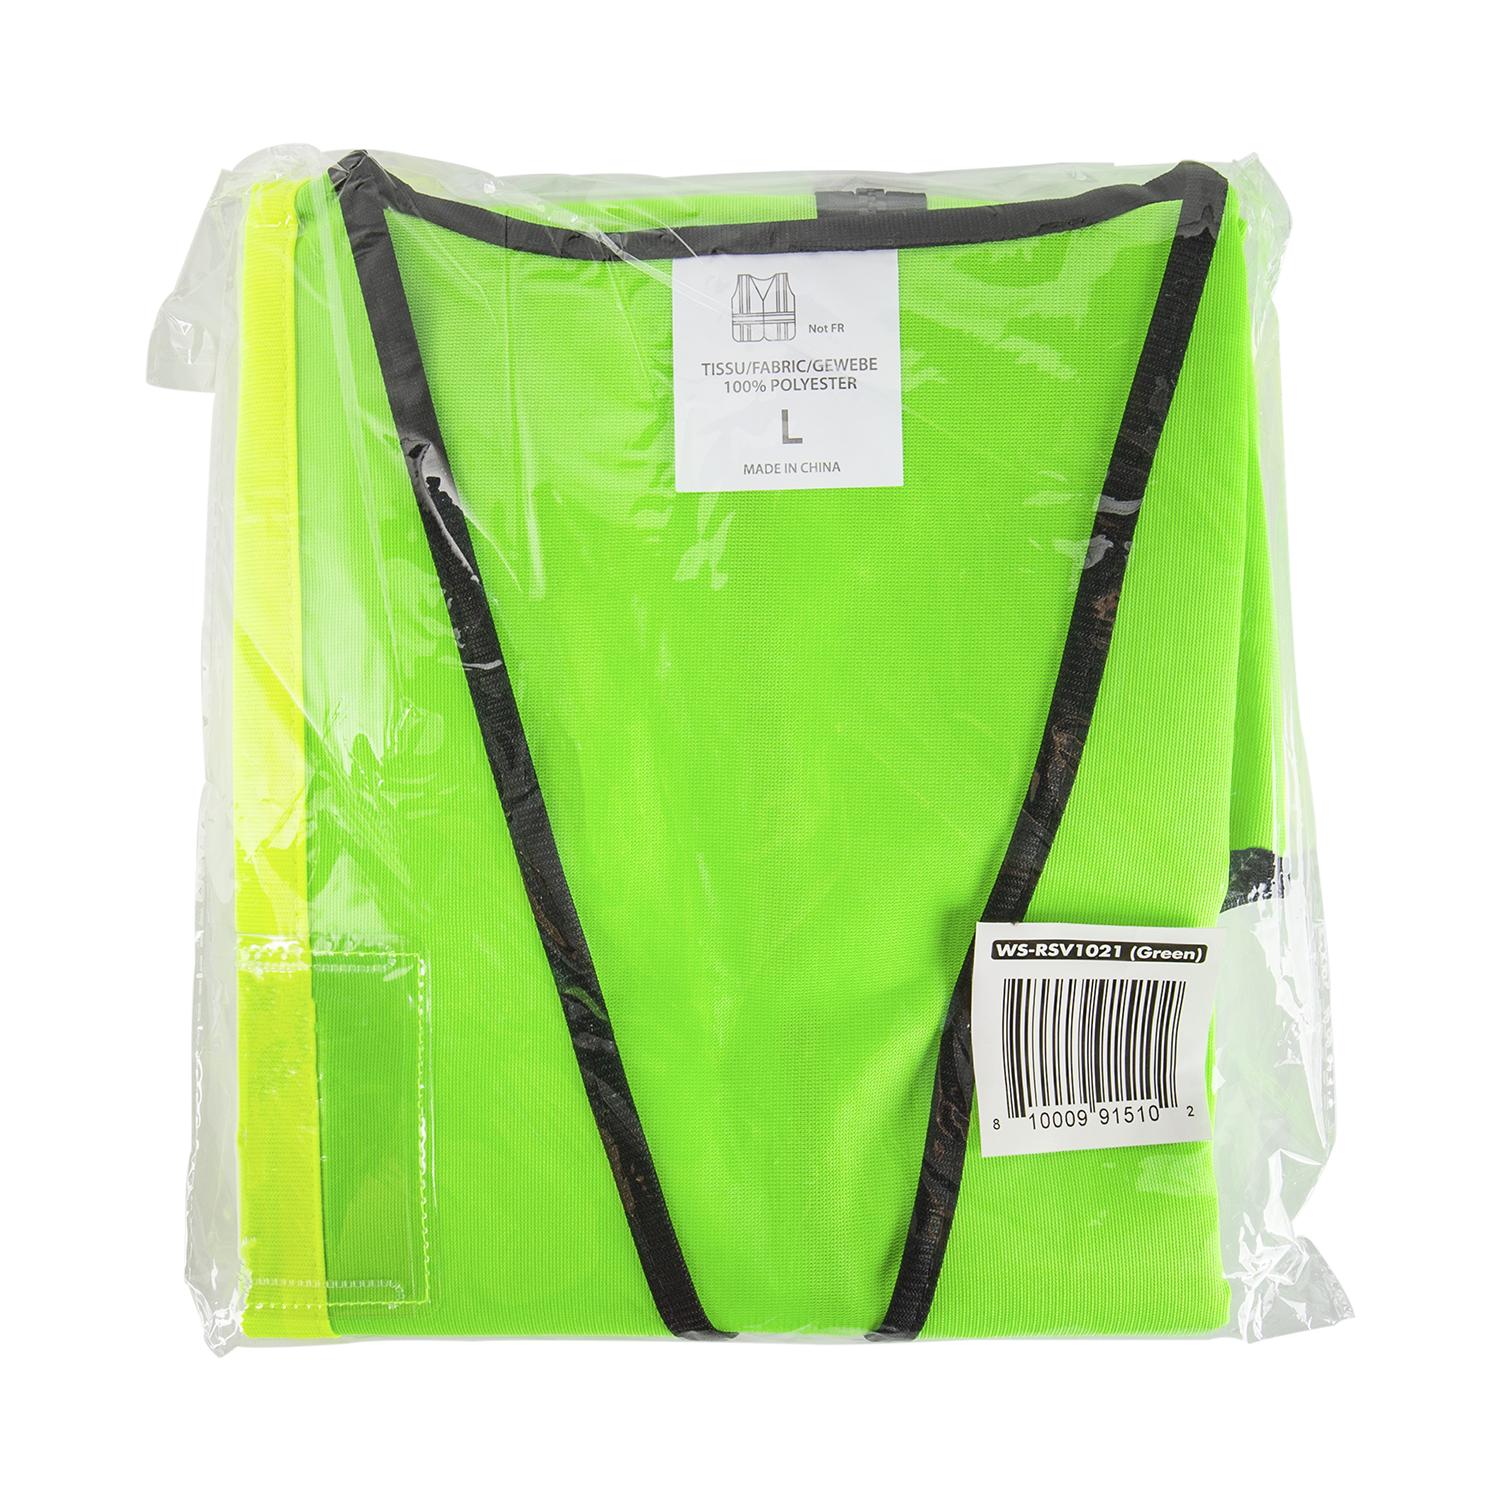 Buy Robustt High Visibility Green Protective Safety Reflective